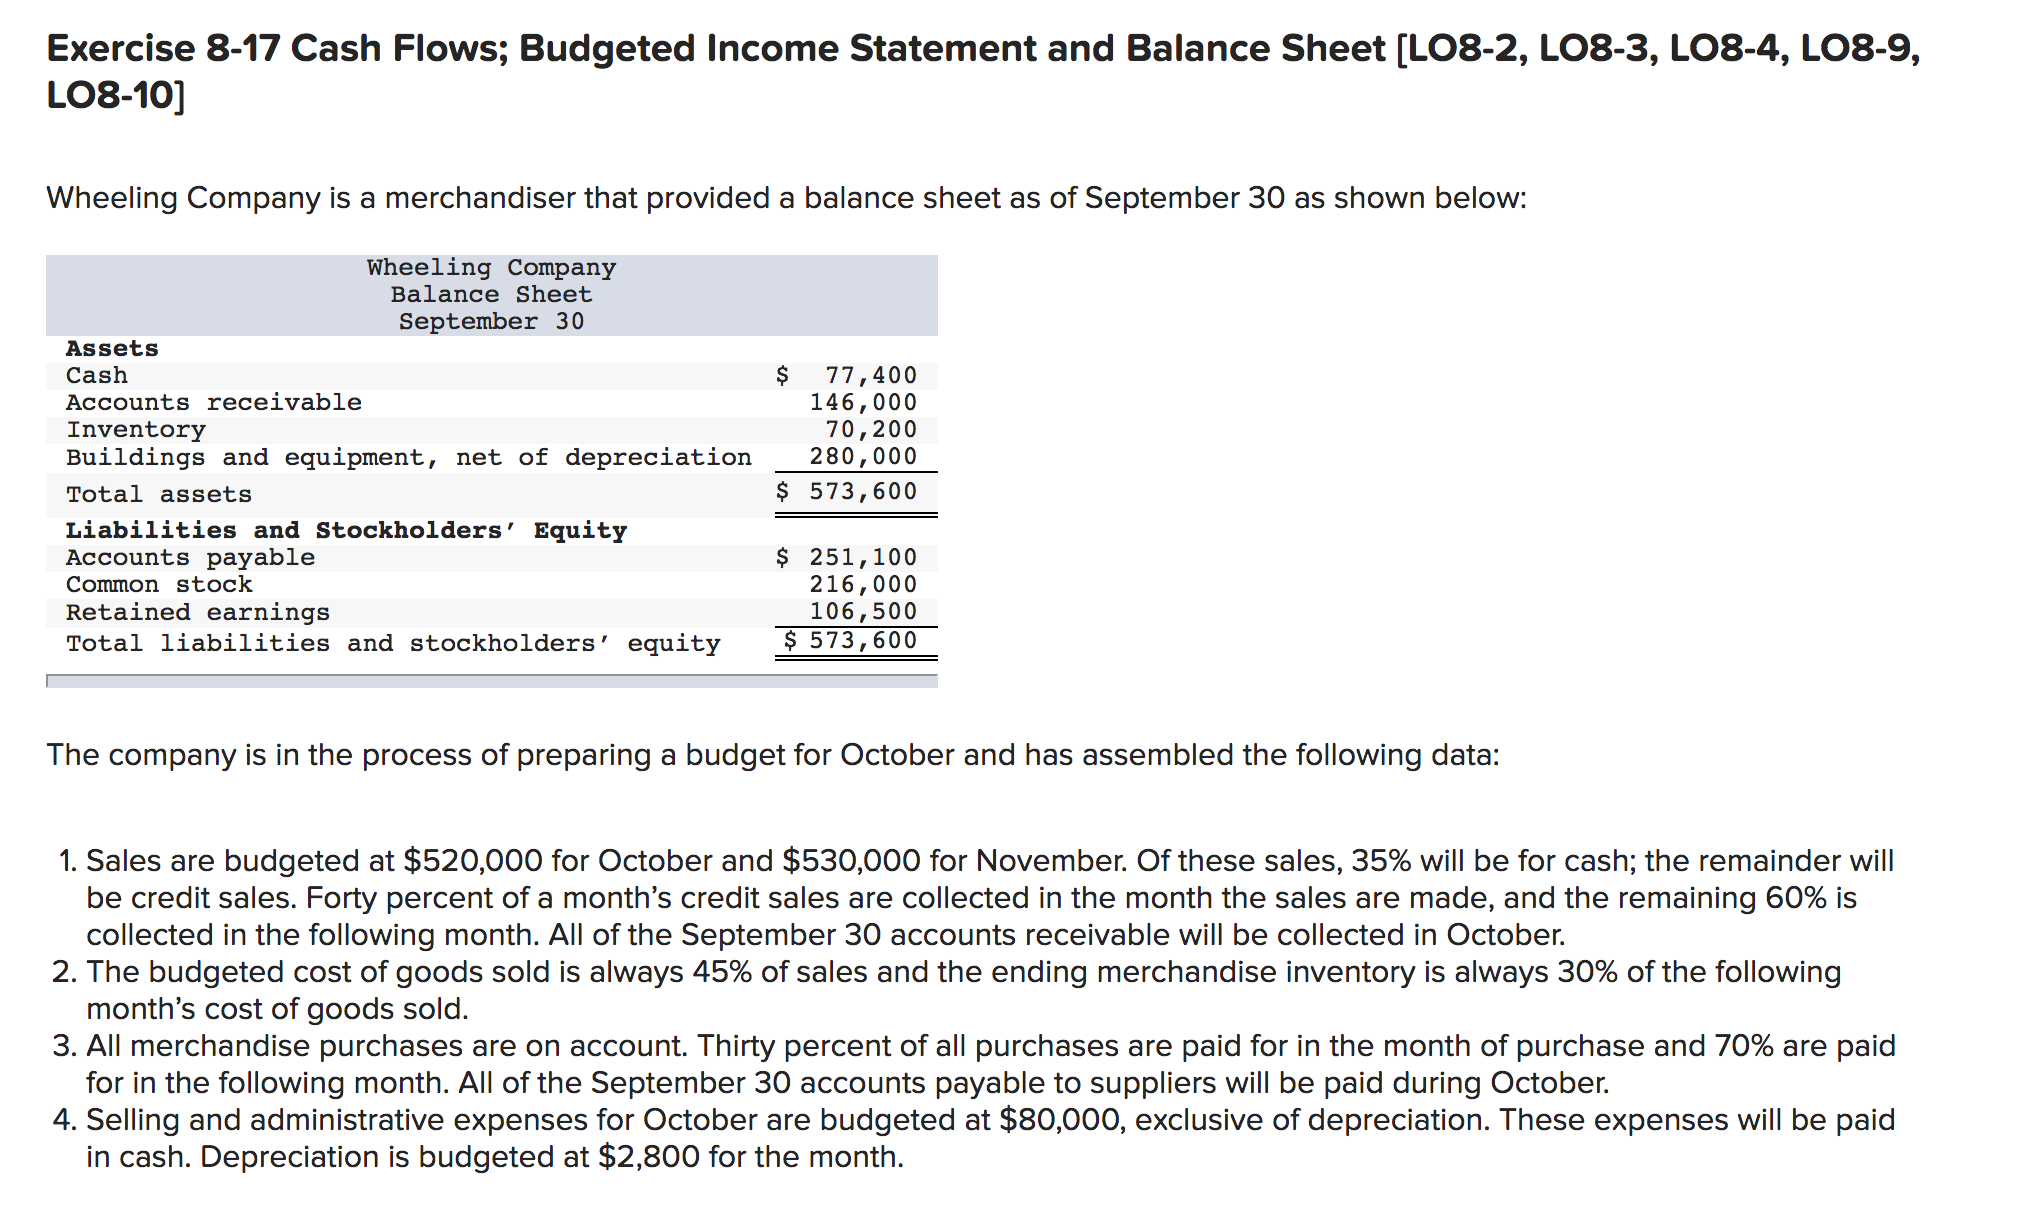 Exercise 8-17 Cash Flows; Budgeted Income Statement and Balance Sheet [LO8-2, LO8-3, LO8-4, LO8-9,
LO8-10]
Wheeling Company is a merchandiser that provided a balance sheet as of September 30 as shown below:
Wheeling Company
Balance Sheet
September 30
Assets
Cash
77,400
146,000
70,200
280,000
$ 573,600
Accounts receivable
Inventory
Buildings and equipment, net of depreciation
Total assets
Liabilities and Stockholders' Equity
Accounts payable
$ 251,100
216,000
106,500
$ 573,600
Common stock
Retained earnings
Total liabilities and stockholders' equity
The company is in the process of preparing a budget for October and has assembled the following data:
1. Sales are budgeted at $520,000 for October and $530,000 for November. Of these sales, 35% will be for cash; the remainder will
be credit sales. Forty percent of a month's credit sales are collected in the month the sales are made, and the remaining 60% is
collected in the following month. All of the September 30 accounts receivable will be collected in October.
2. The budgeted cost of goods sold is always 45% of sales and the ending merchandise inventory is always 30% of the following
month's cost of goods sold.
3. All merchandise purchases are on account. Thirty percent of all purchases are paid for in the month of purchase and 70% are paid
for in the following month. All of the September 30 accounts payable to suppliers will be paid during October.
4. Selling and administrative expenses for October are budgeted at $80,000, exclusive of depreciation. These expenses will be paid
in cash. Depreciation is budgeted at $2,800 for the month.
